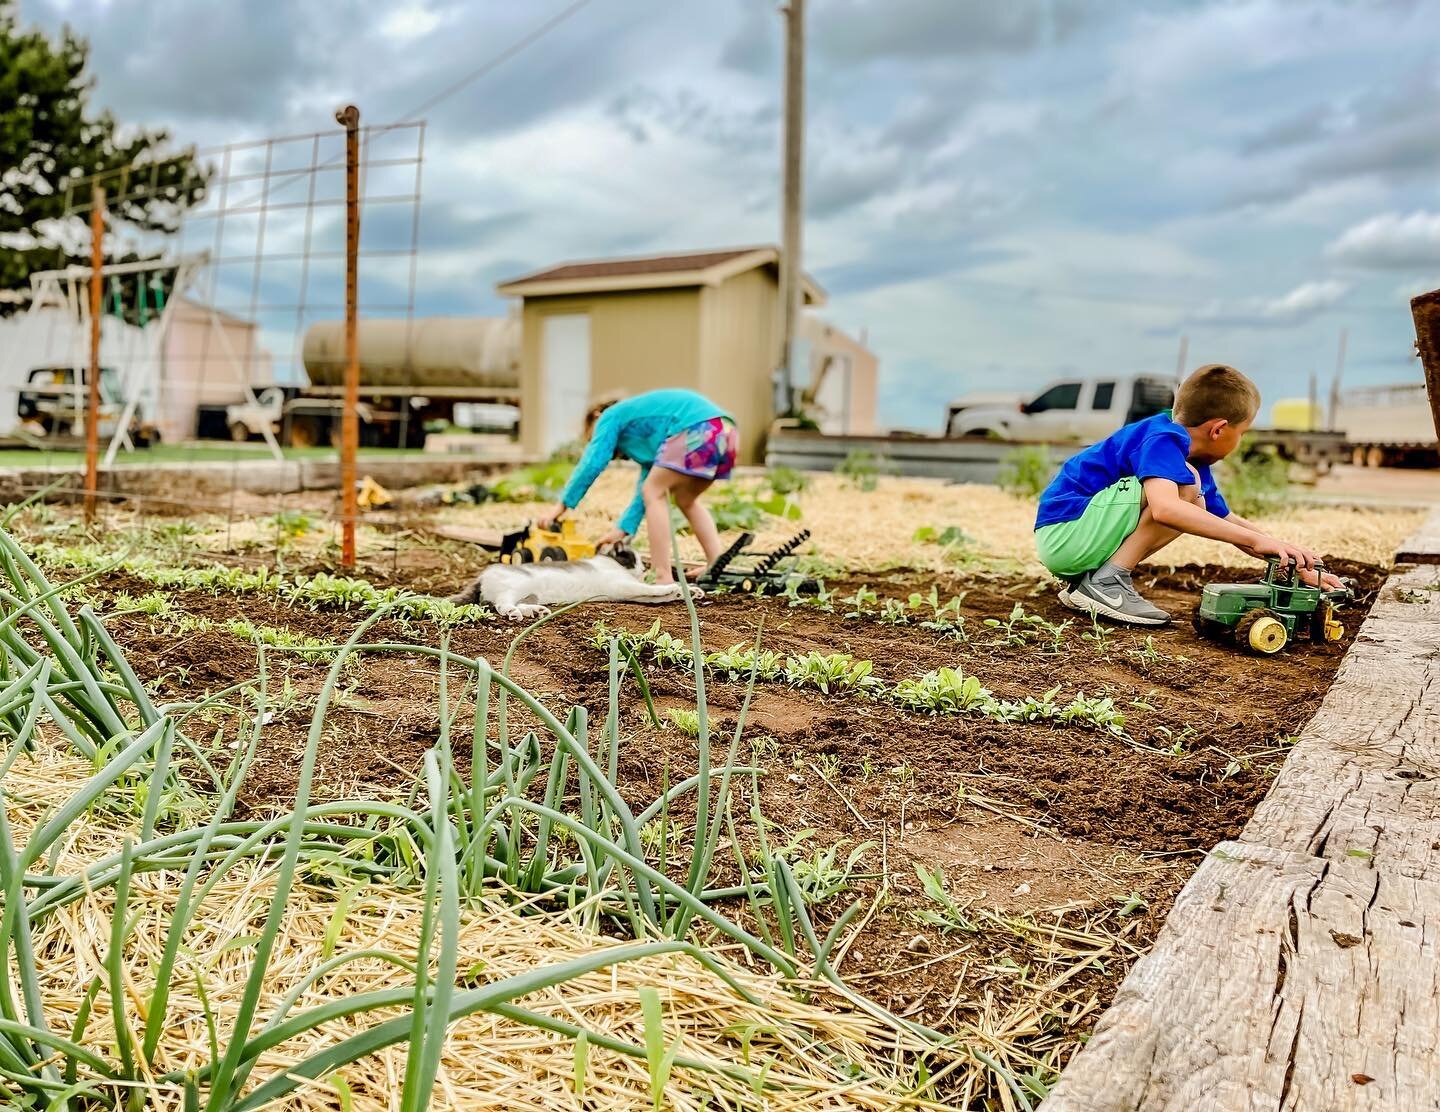 Garden - How it started &amp; how it&rsquo;s going ➡️

Do they have a sandbox to play in?

YES. 

Would they rather play near me? 

YES.

Are their dump truck race tracks helping with weed control?

YES.

Just as parenting, I&rsquo;m learning how to 